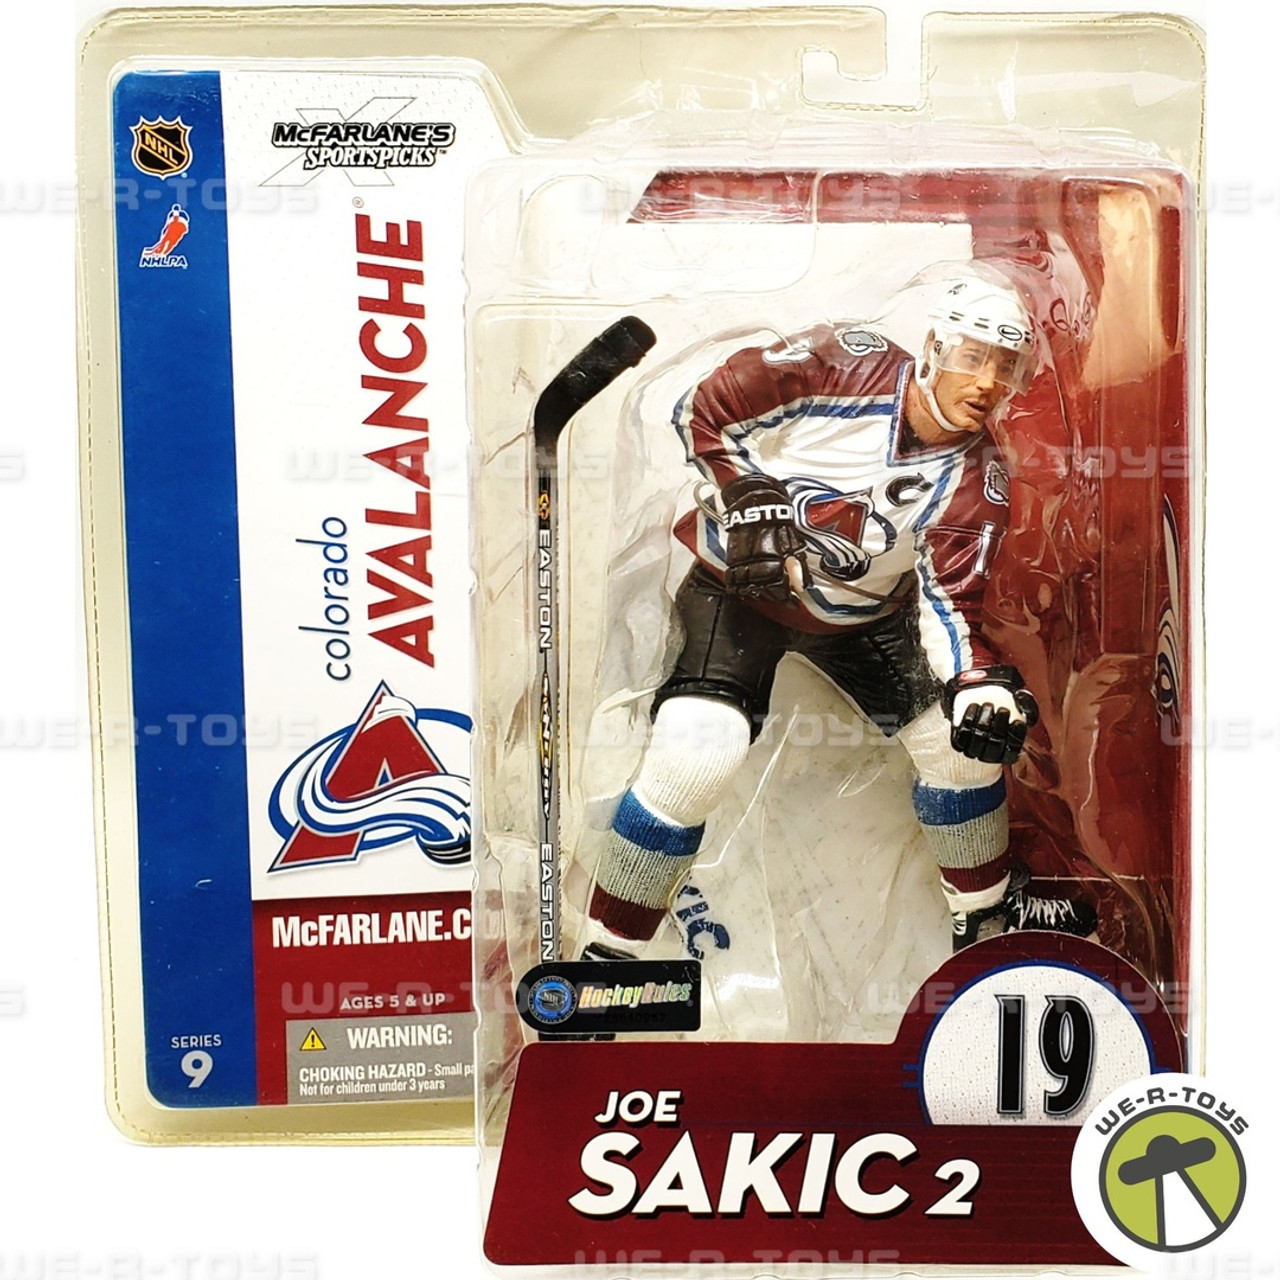 Avalanche Officially Licensed 4-Pack Hockey Puck Collection